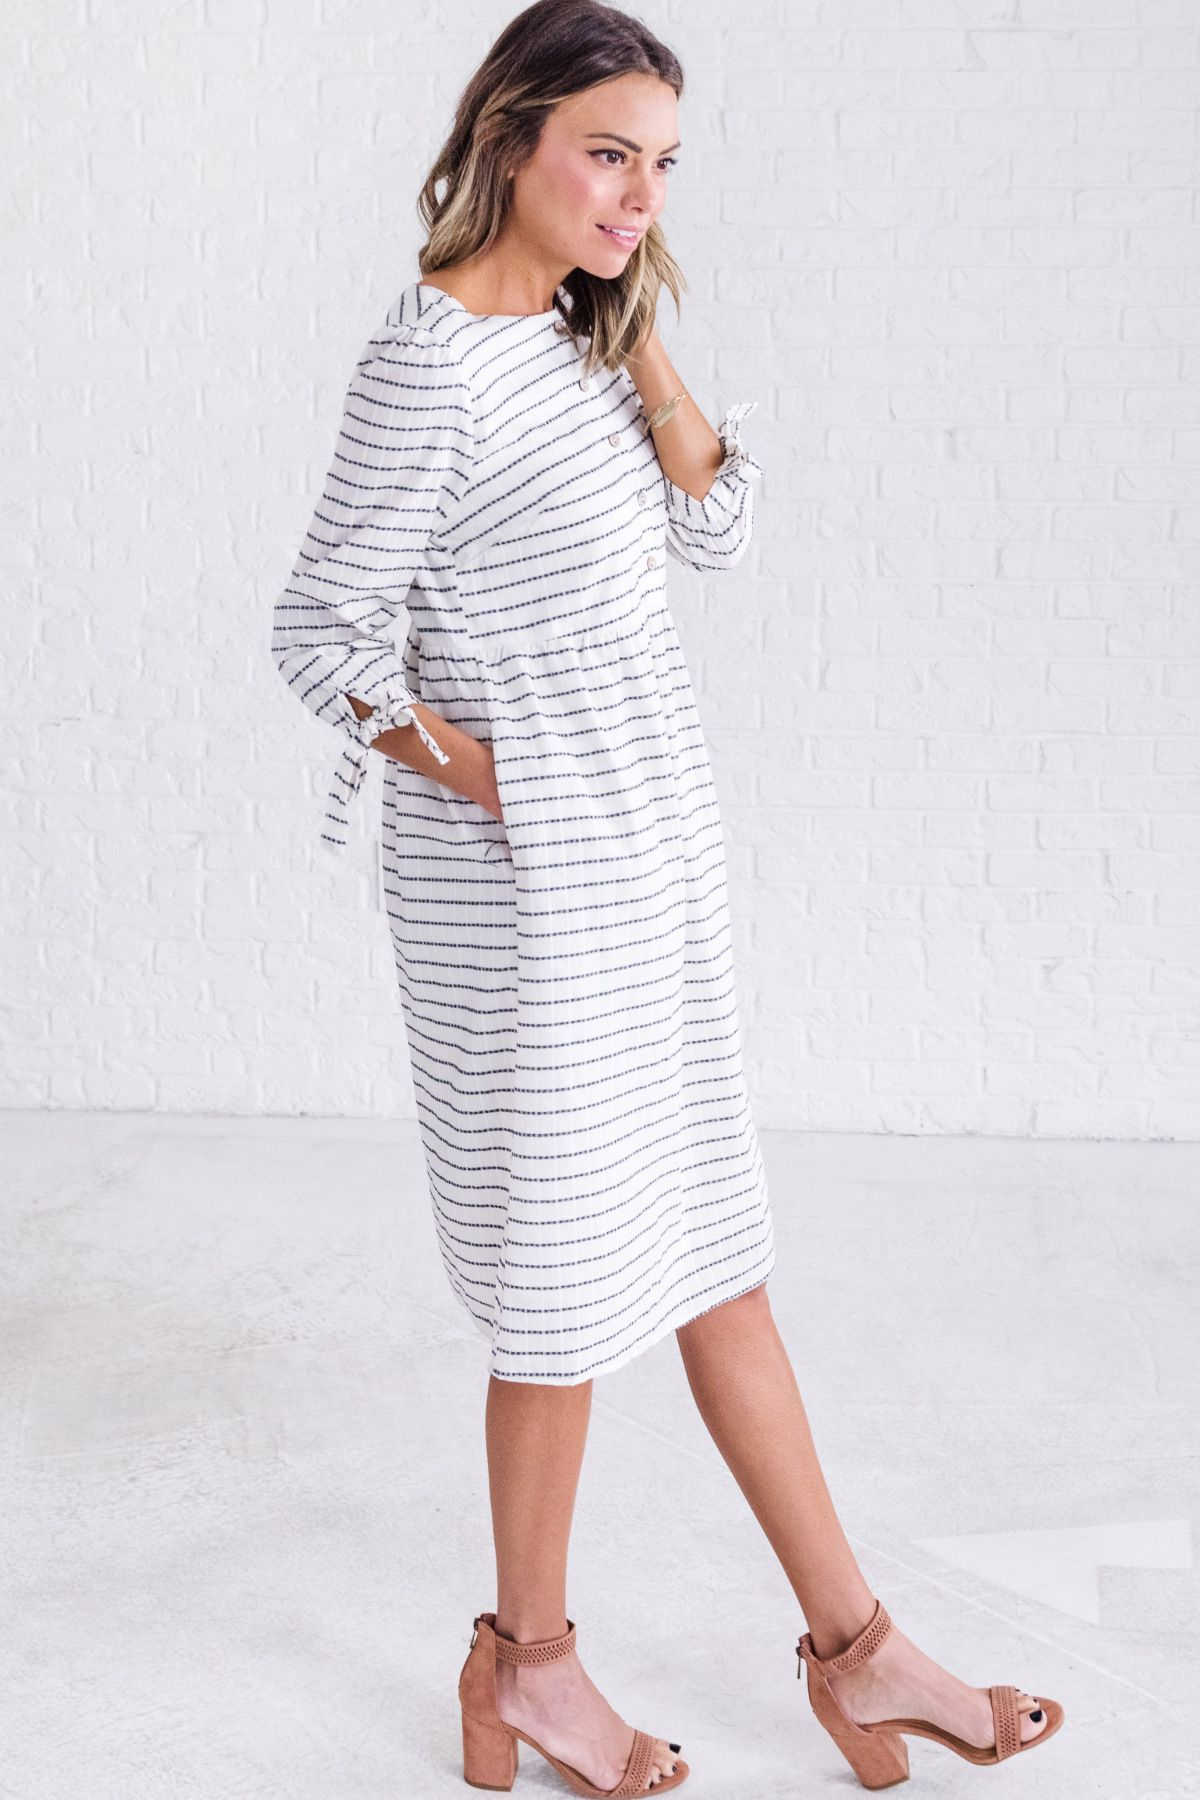 10 Most Popular Cute Outfit Ideas For Church white striped dress cute church outfits for women cute spring 2024